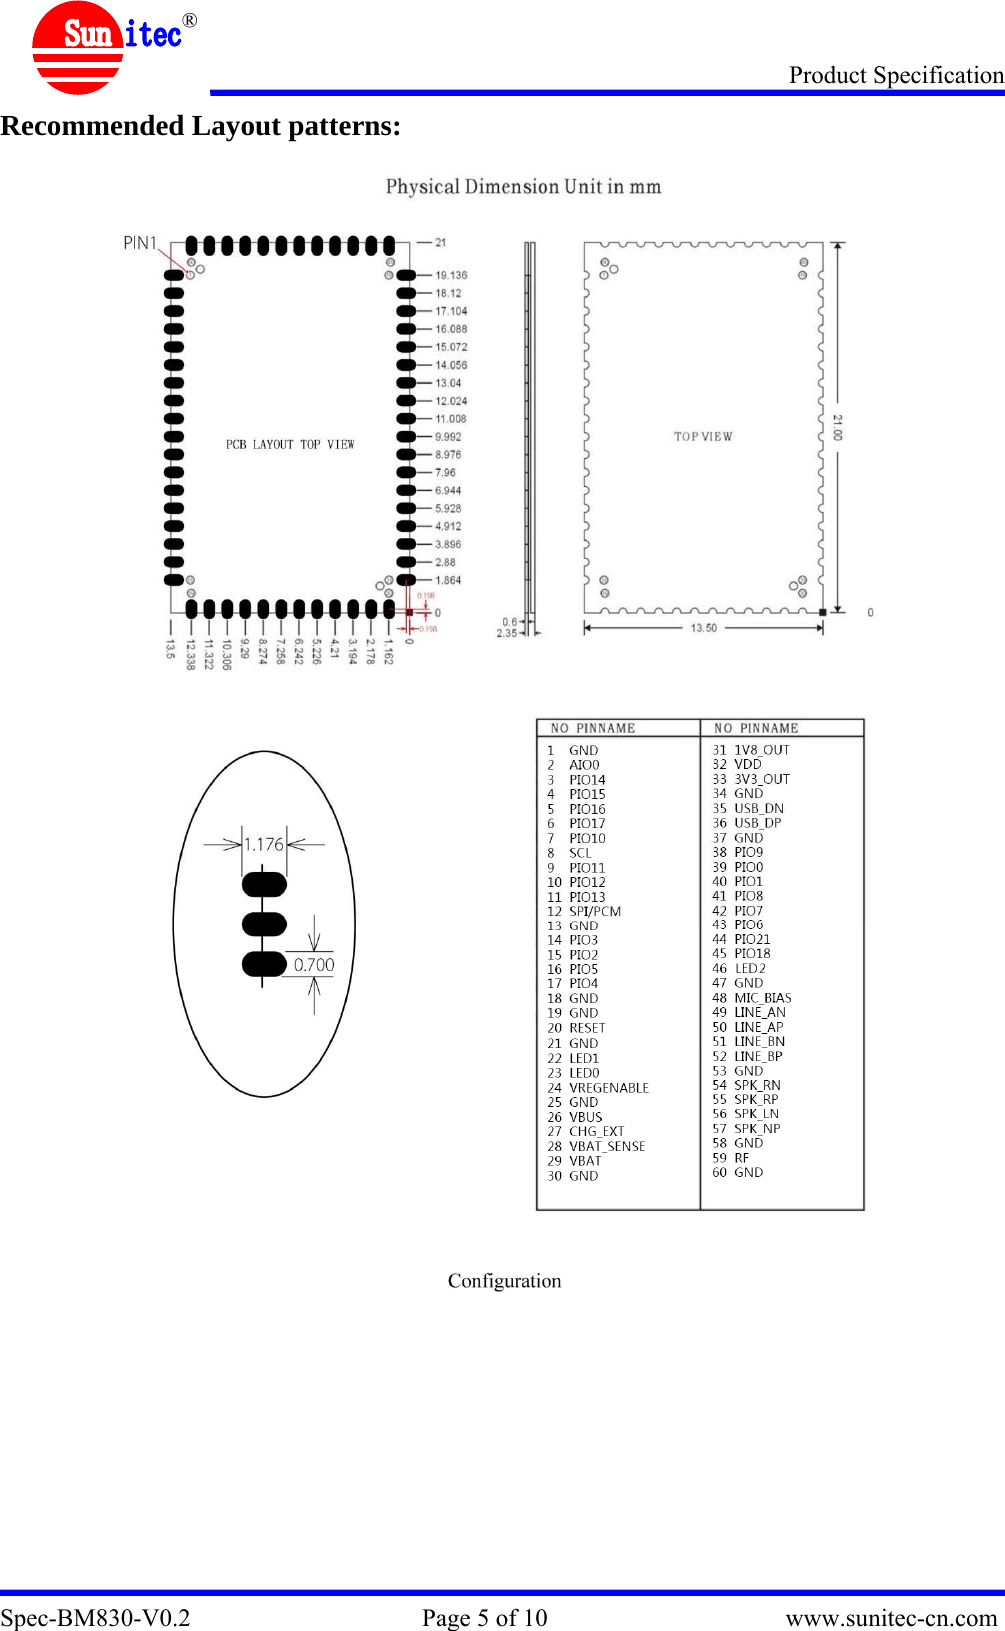 Product Specification Spec-BM830-V0.2                                     Page 5 of 10                                      www.sunitec-cn.com  ® Recommended Layout patterns:     